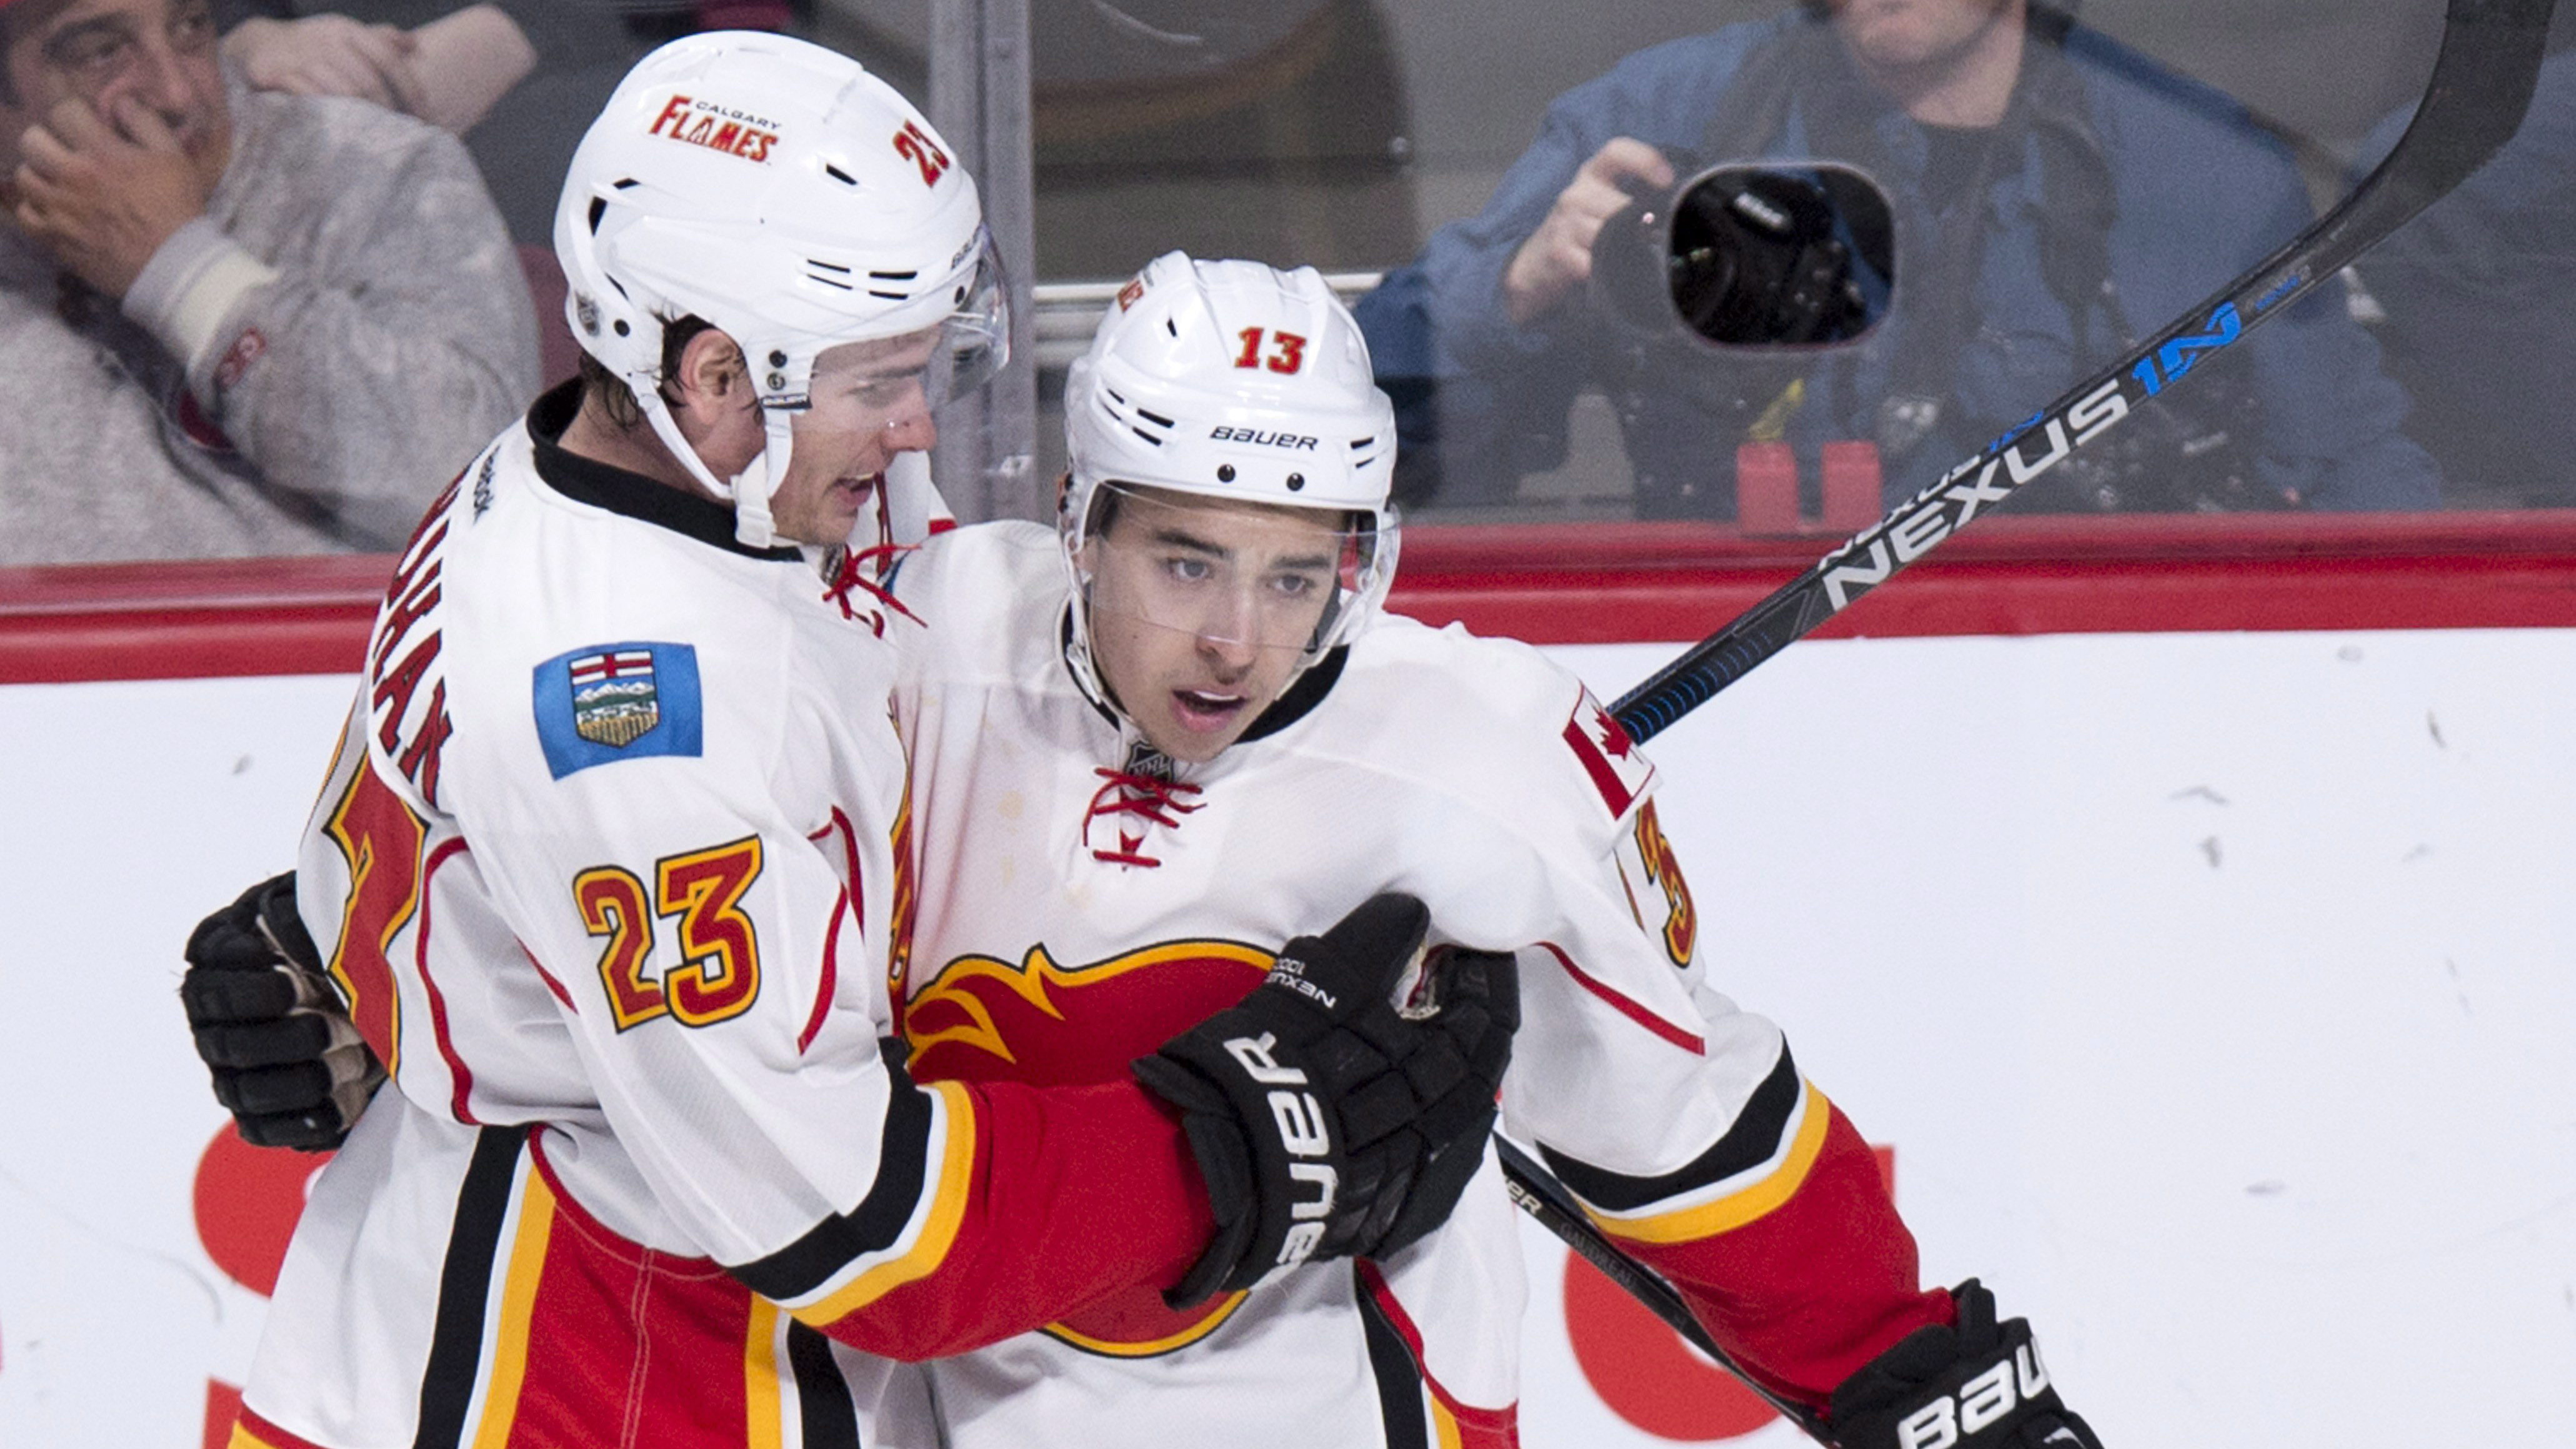 Calgary Flames' Johnny Gaudreau, right, celebrates his goal against the Montreal Canadiens with teammate Sean Monahan. (Paul Chiasson/CP)